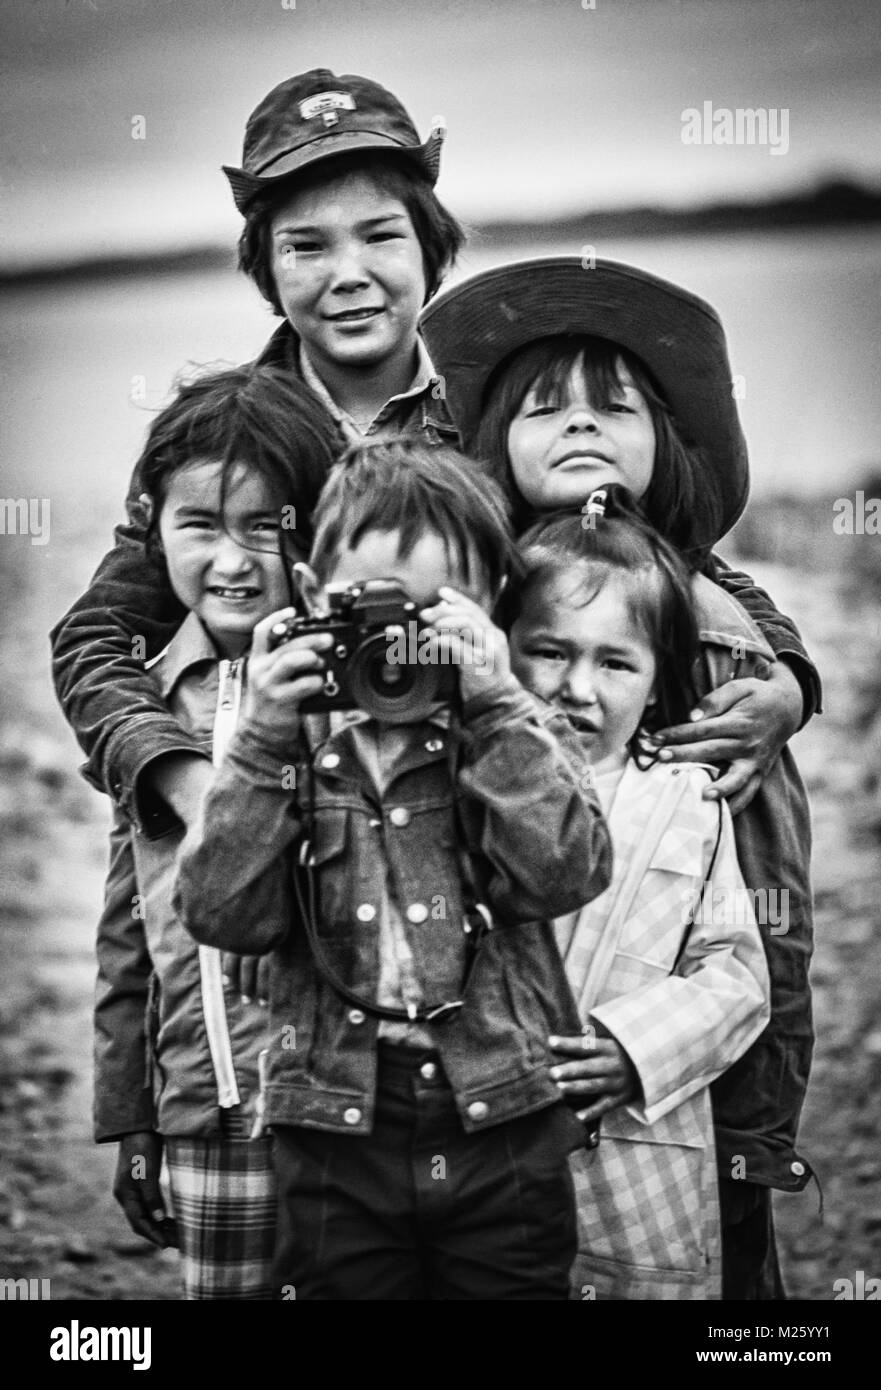 Canada;Kanada; First Nation Indian Children with camera at James Bay in Northern Ontario,Canadsa,North America Stock Photo